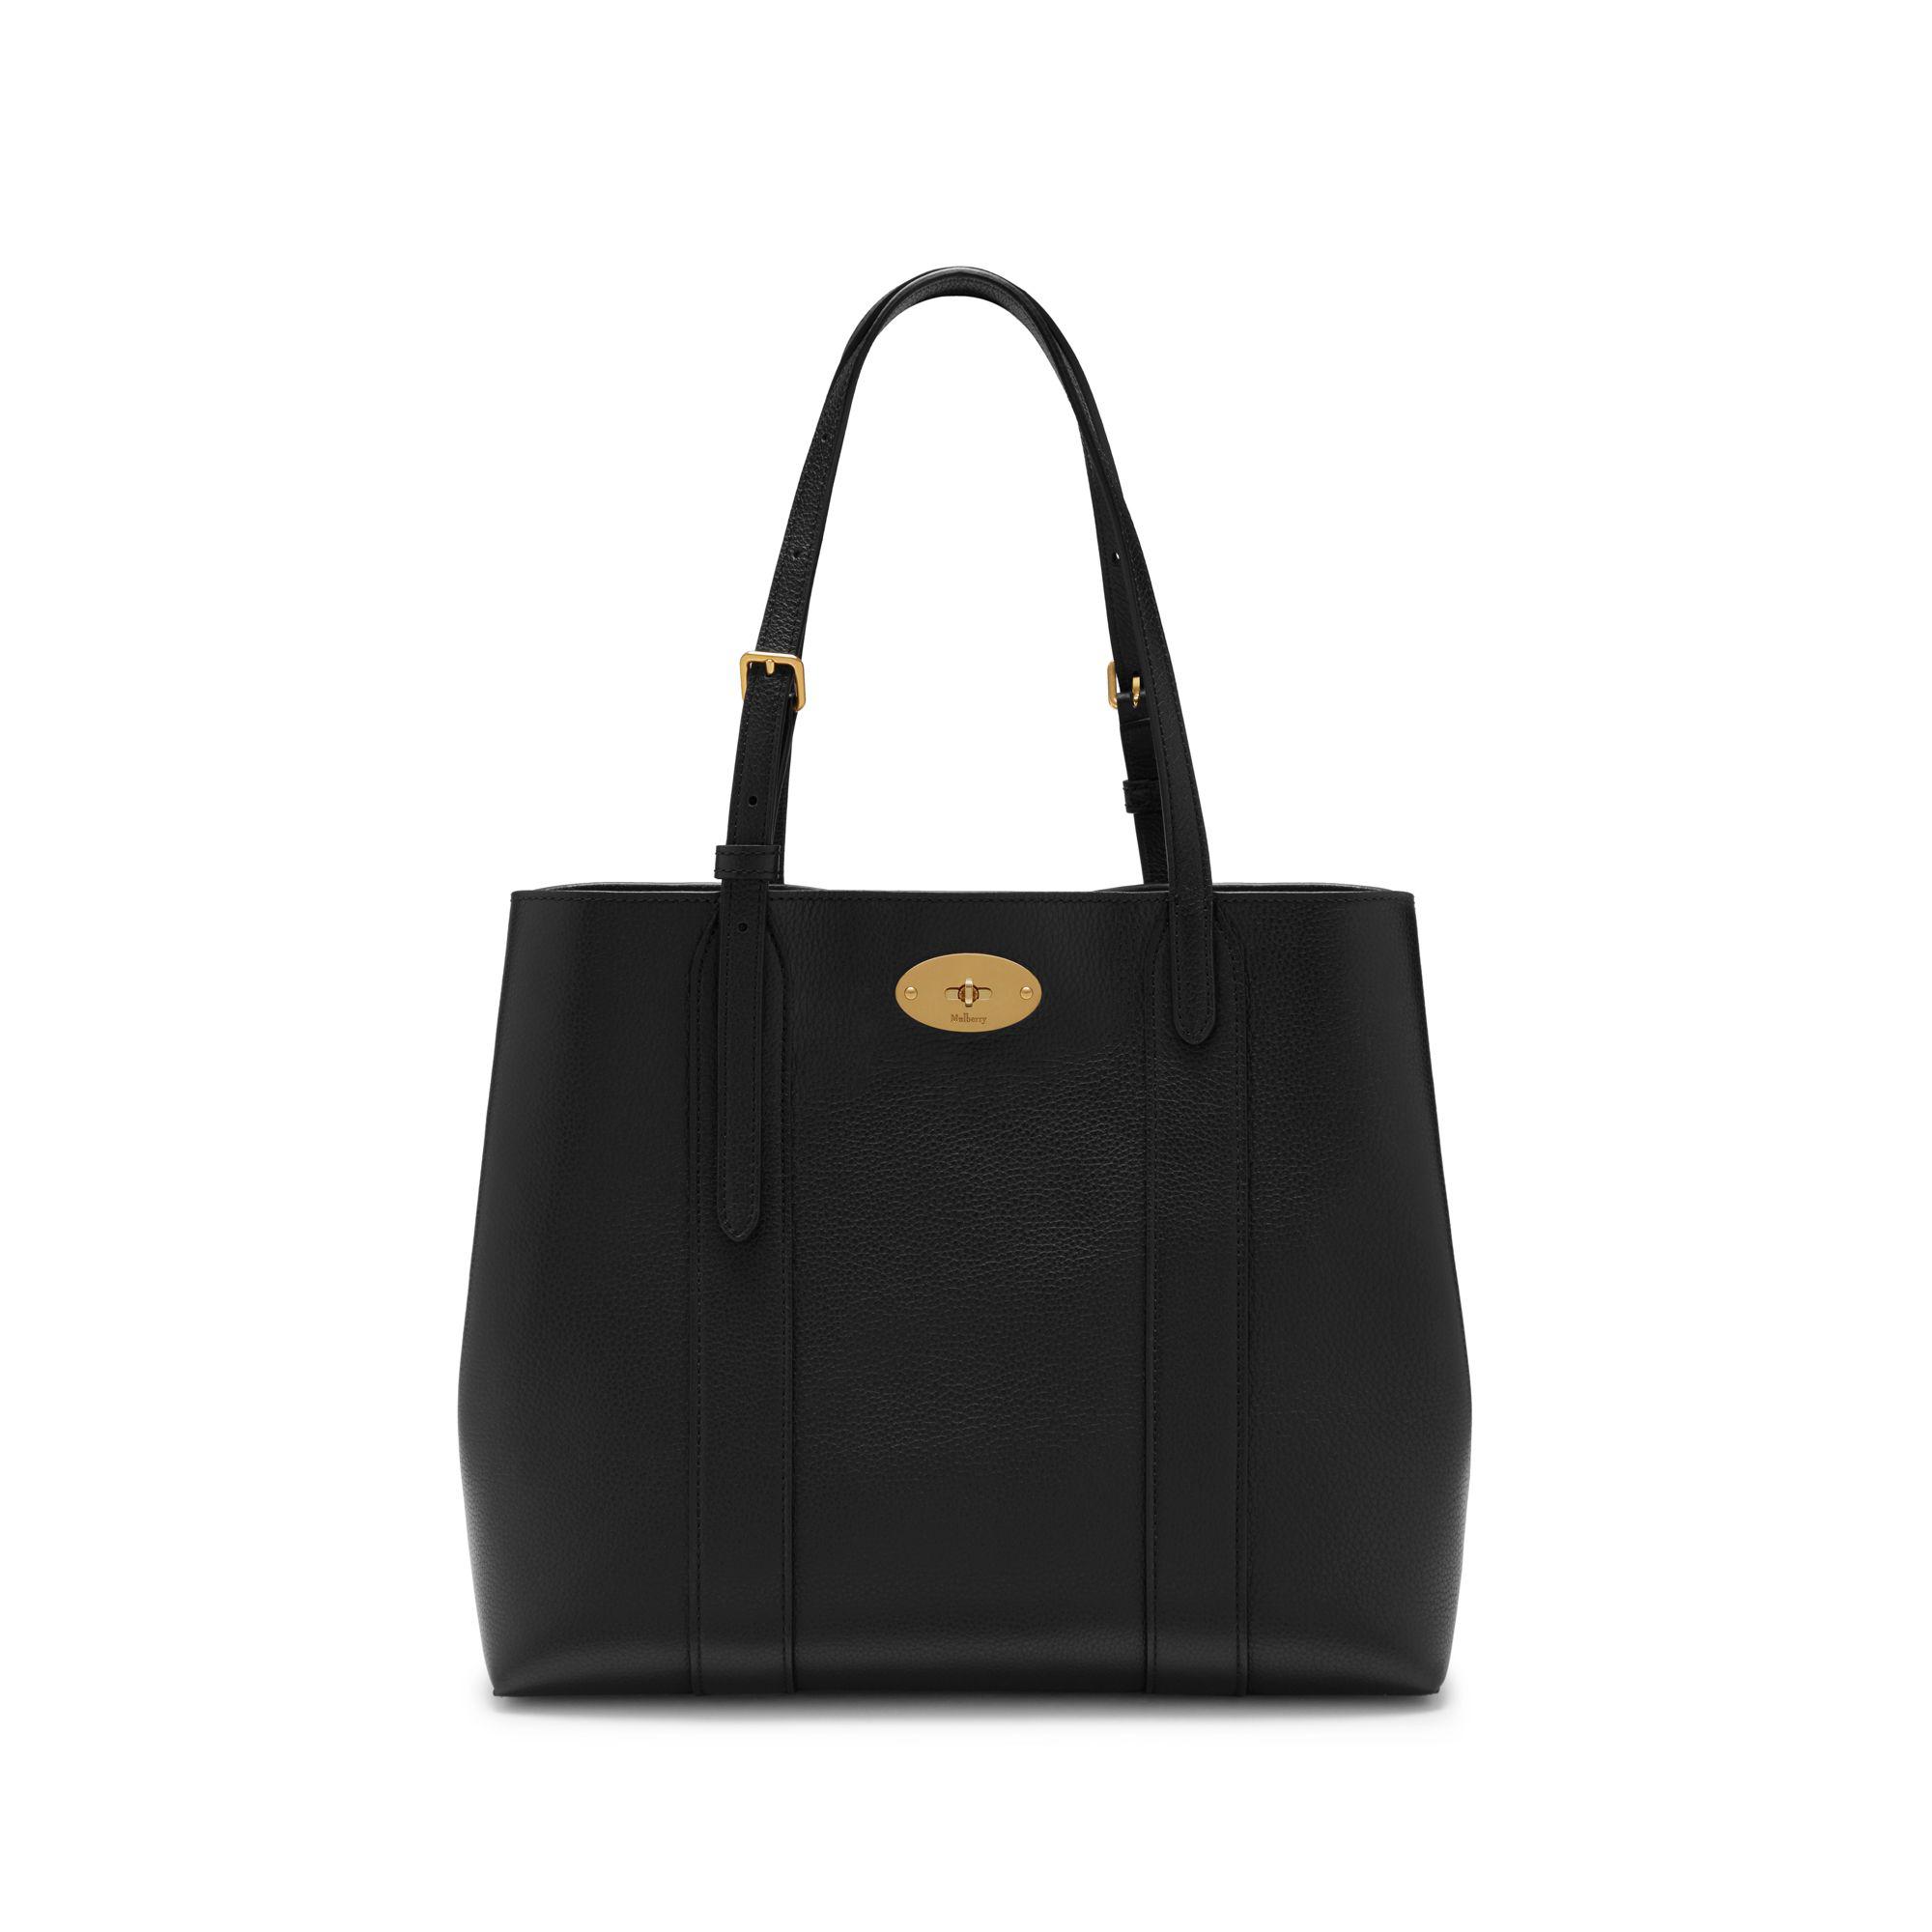 Mulberry Leather Small Bayswater Tote Bag in Black - Lyst